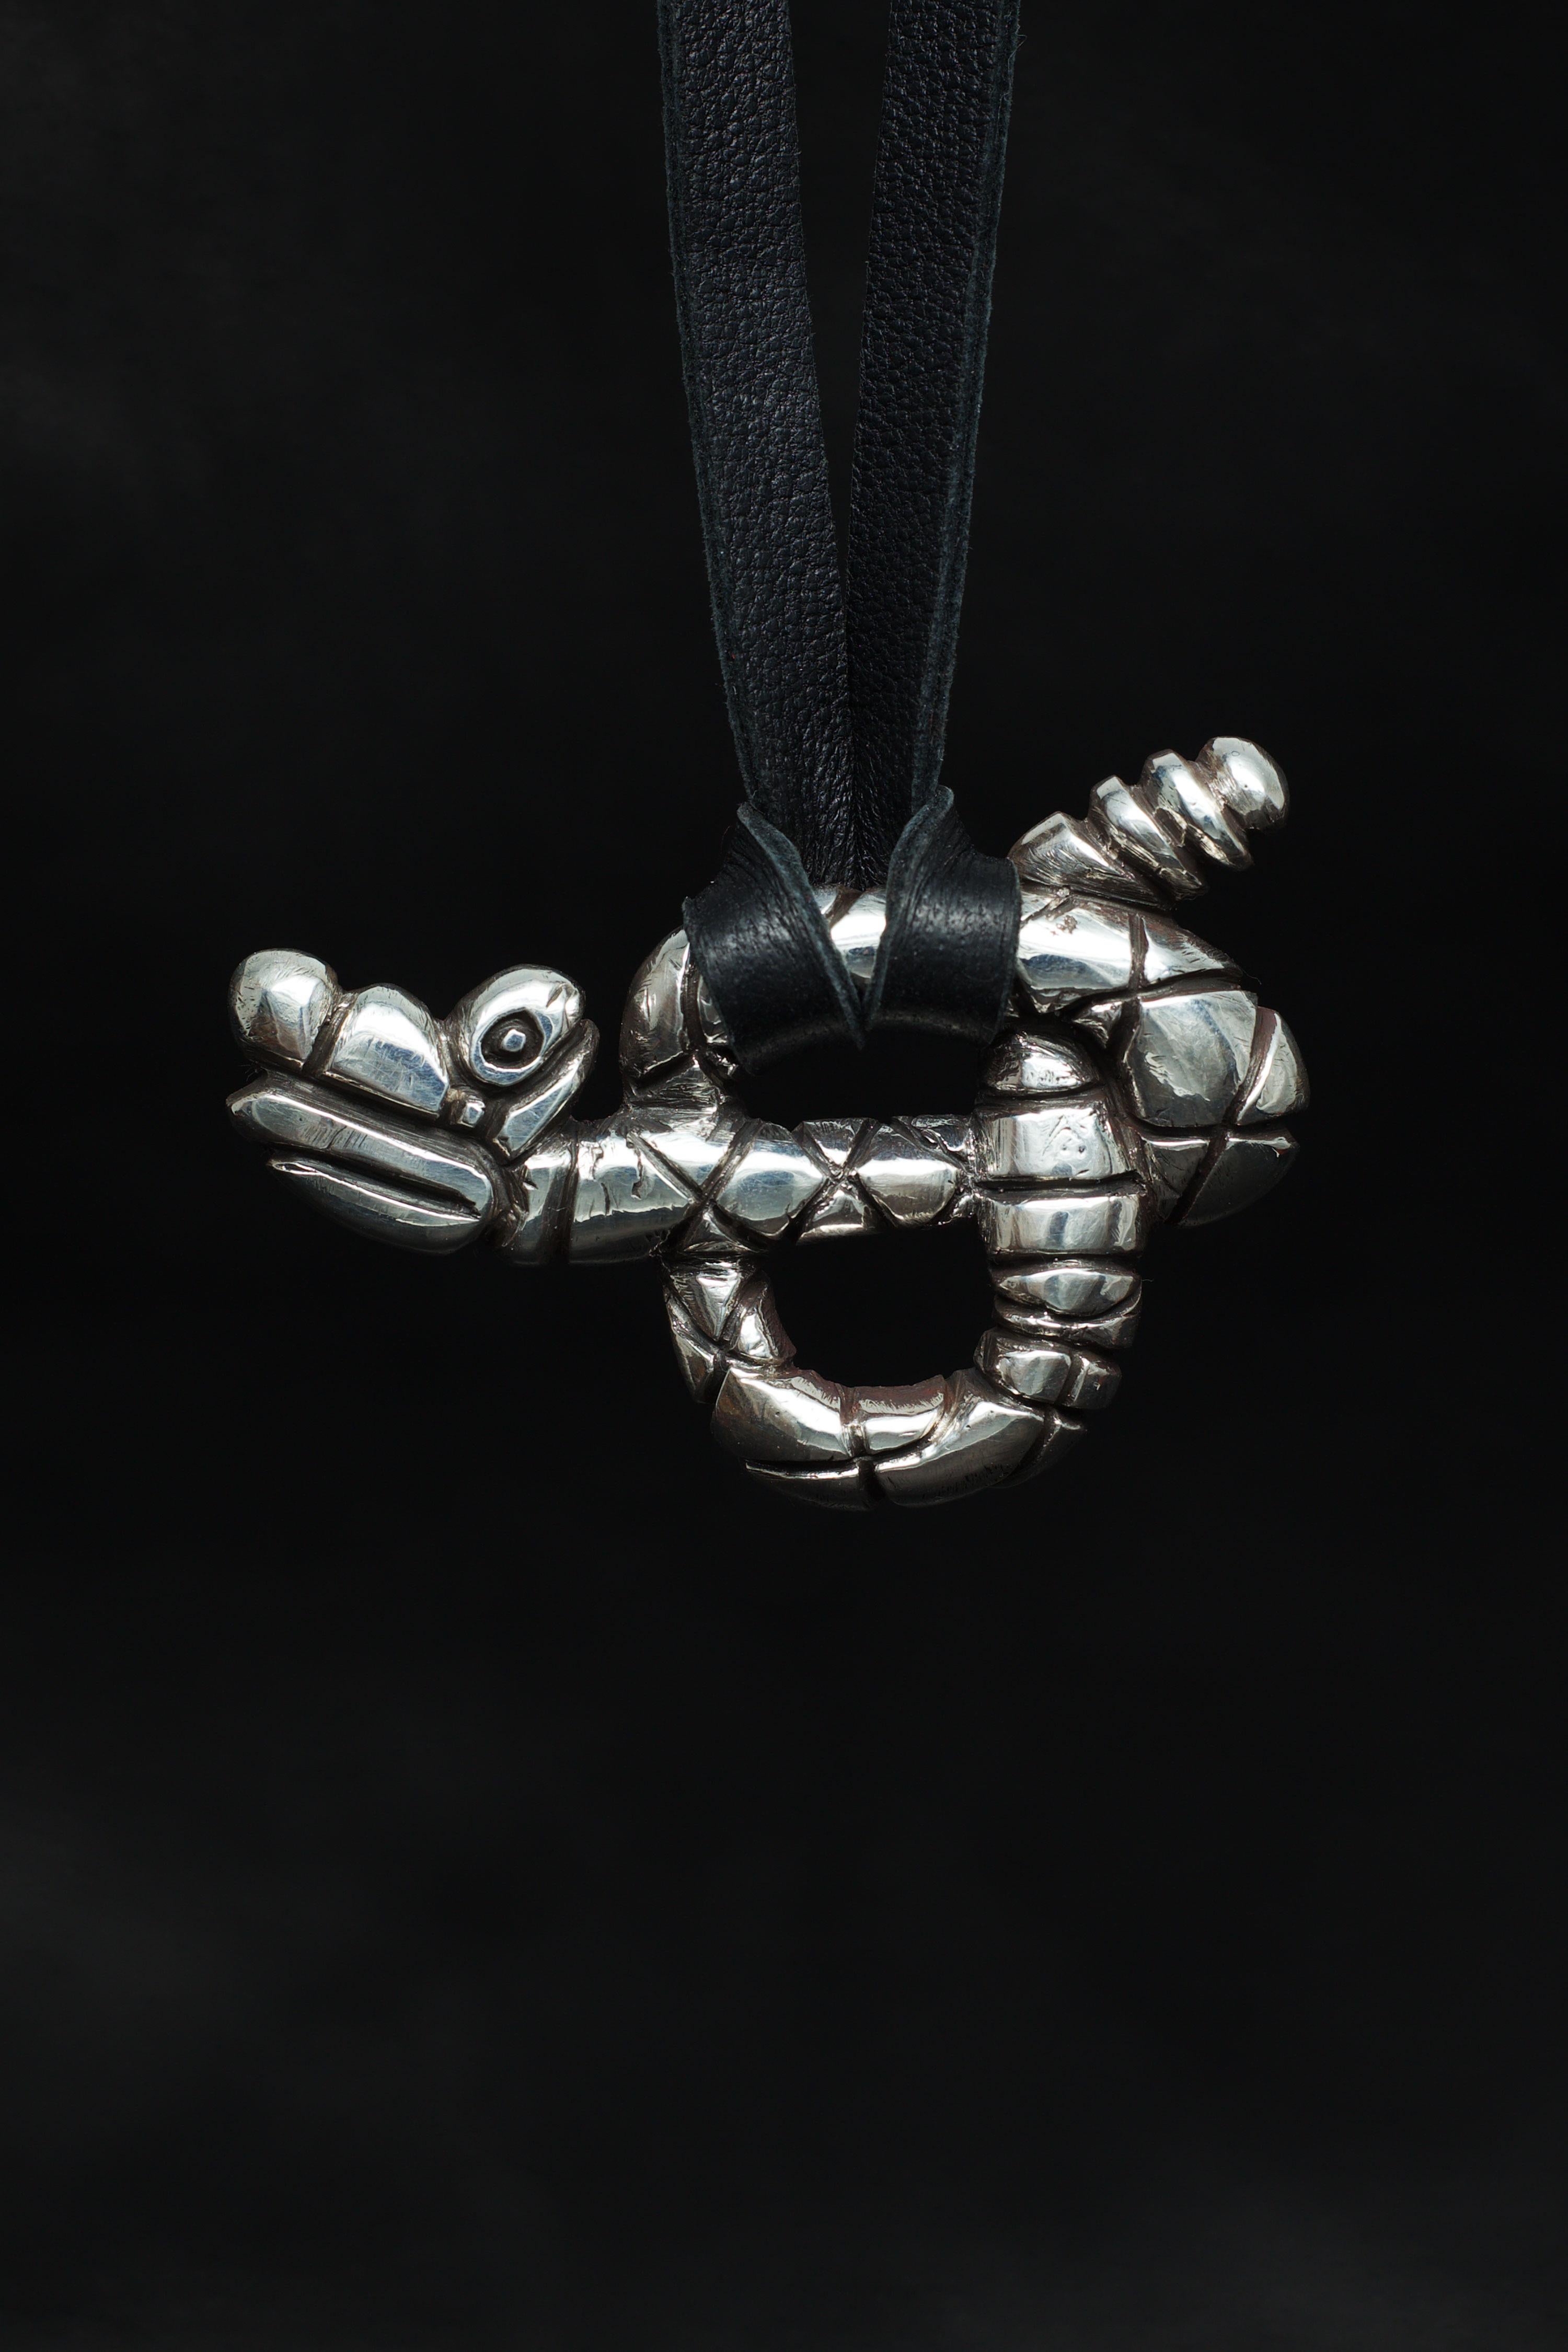 The Rattlesnake pendant by Ken Fury is a hand-carved and cast piece that captures the unique beauty and power of this iconic North American snake. With its diamond-shaped markings, coiled body, and unmistakable rattle, this pendant is a statement of